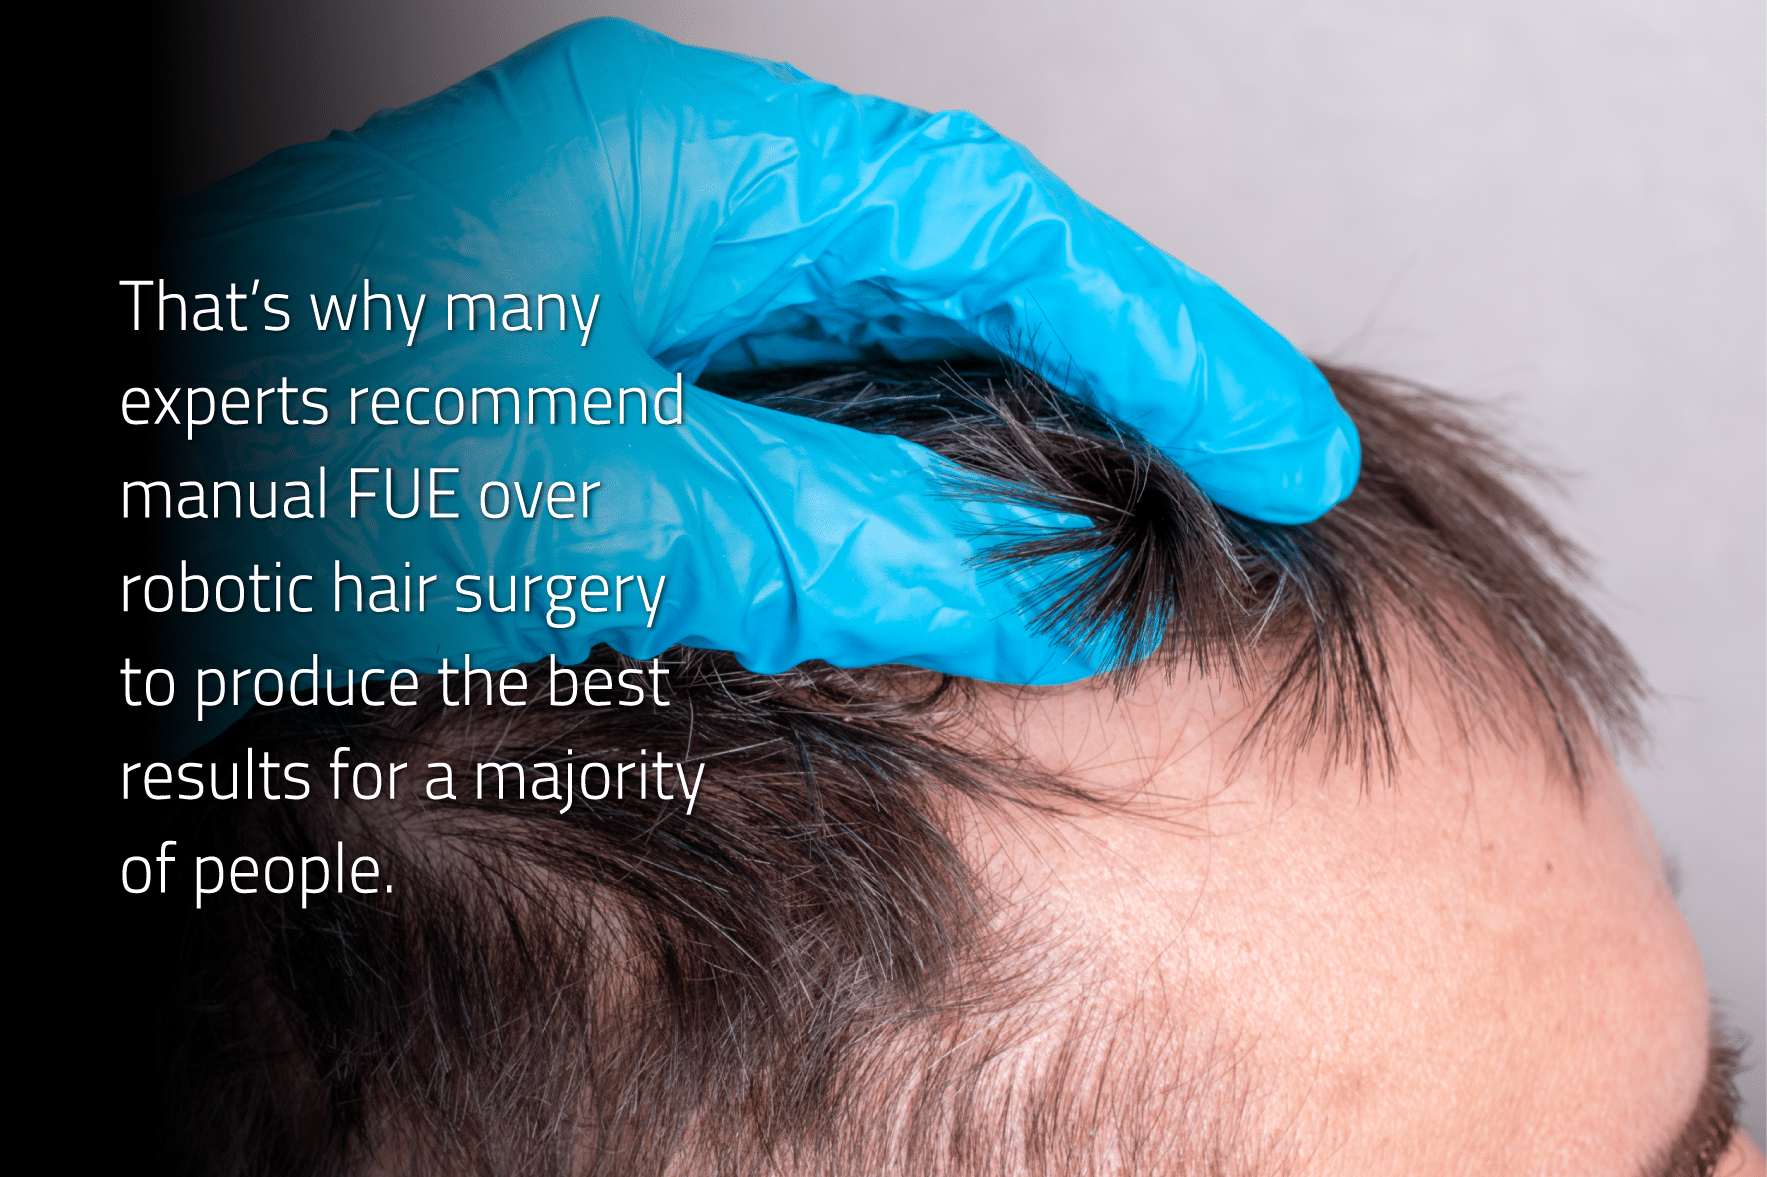 Why many experts recommend manual FUE over robotic hair surgery